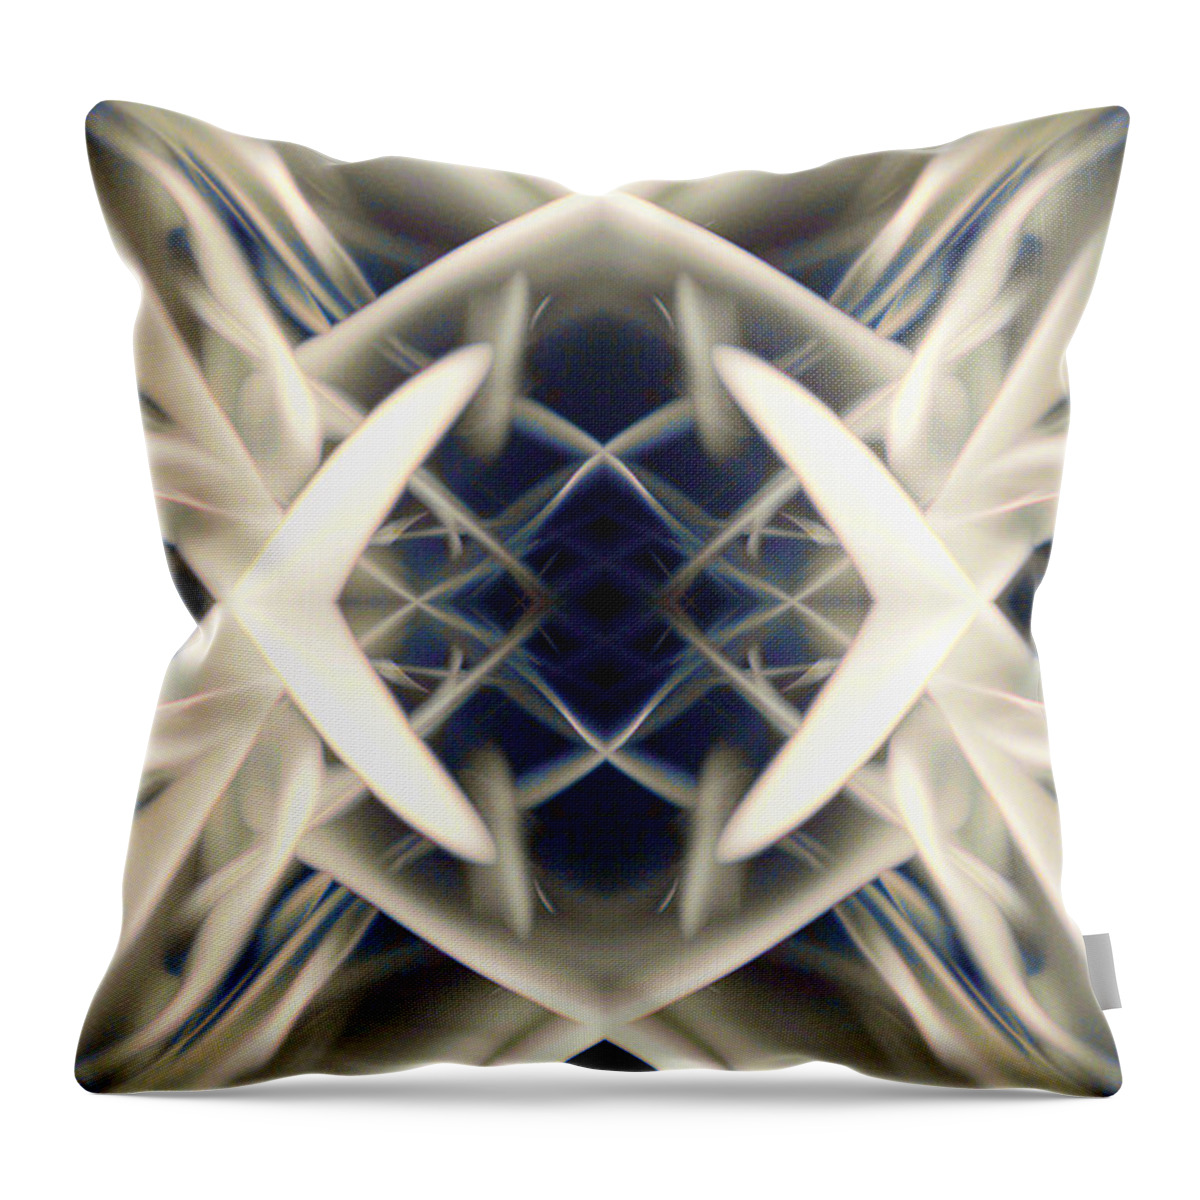 Image Tags Throw Pillow featuring the digital art Fierce Flake 2927 by Alex W McDonell